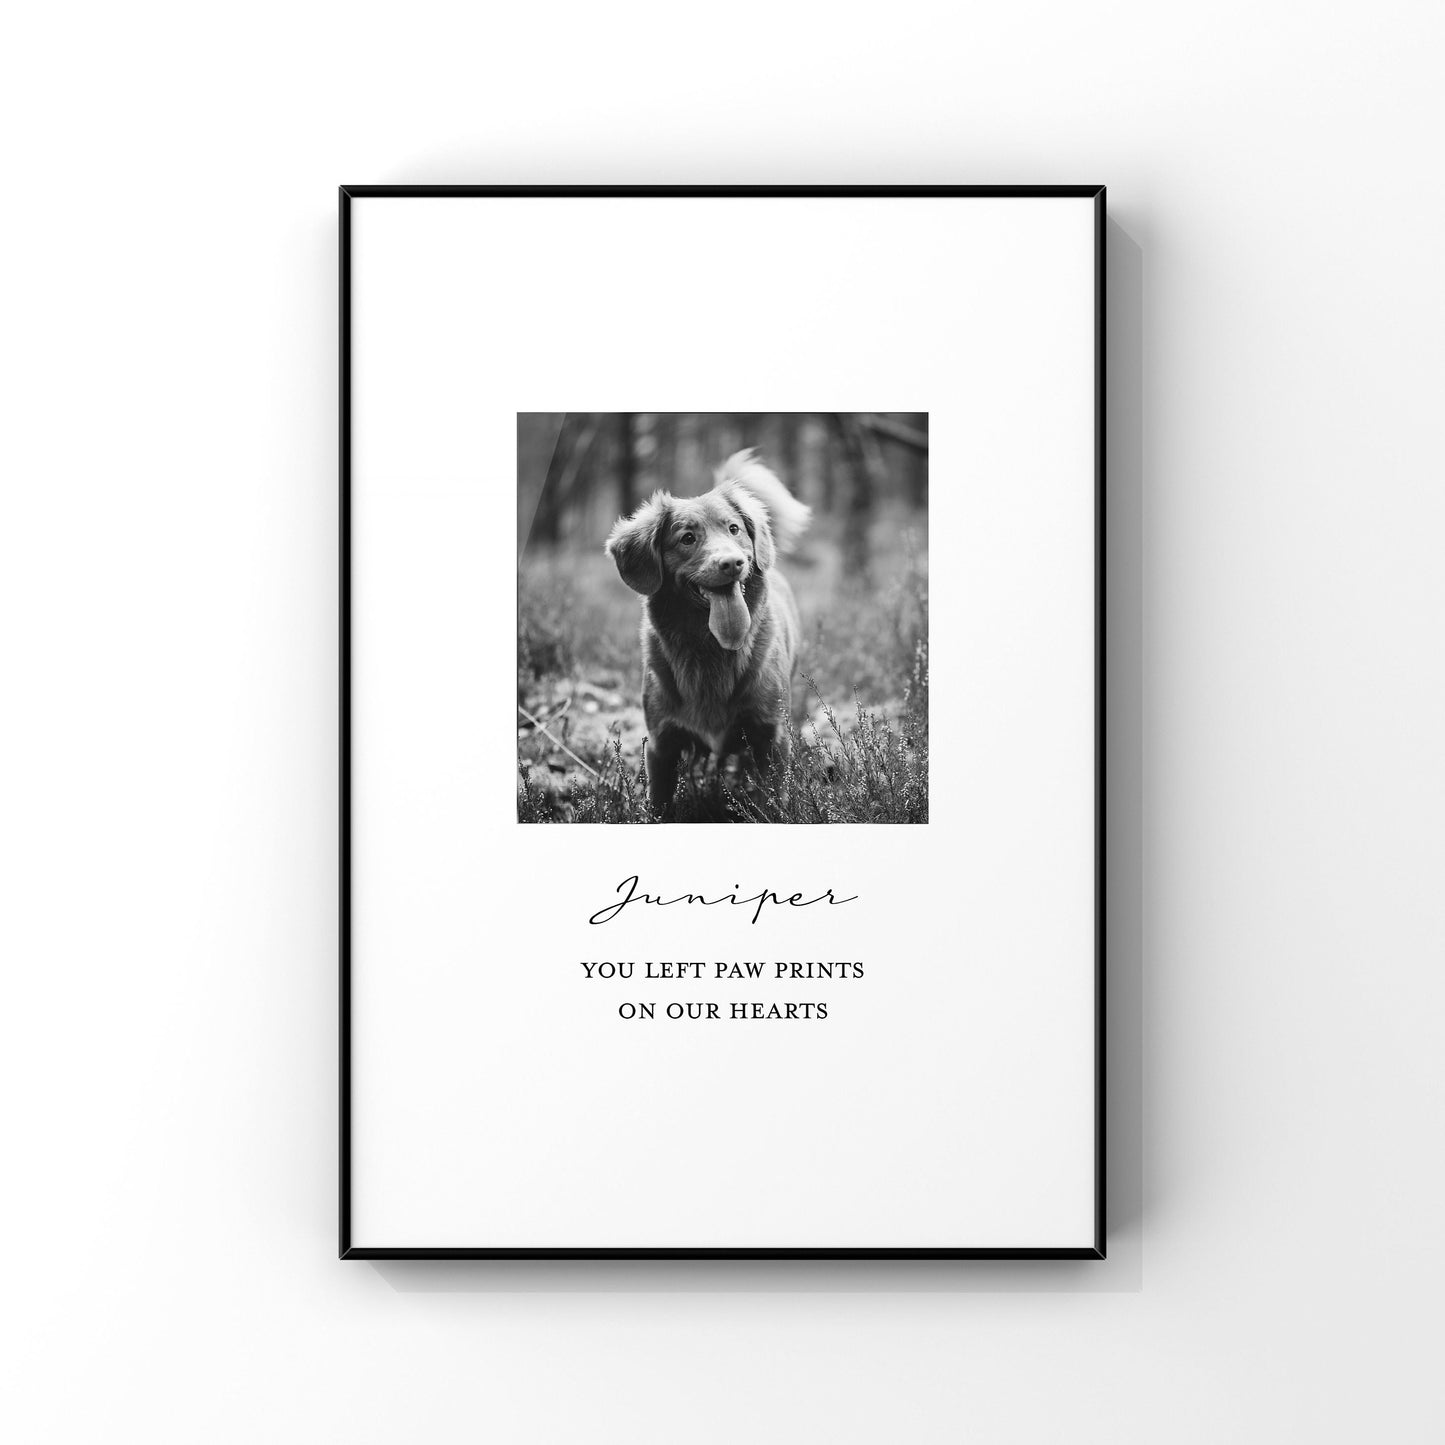 Custom pet memorial gift,Personalized pet bereavement gift,Custom pet remembrance gift,In memory photo gift,Sympathy gift,Condolence for pet